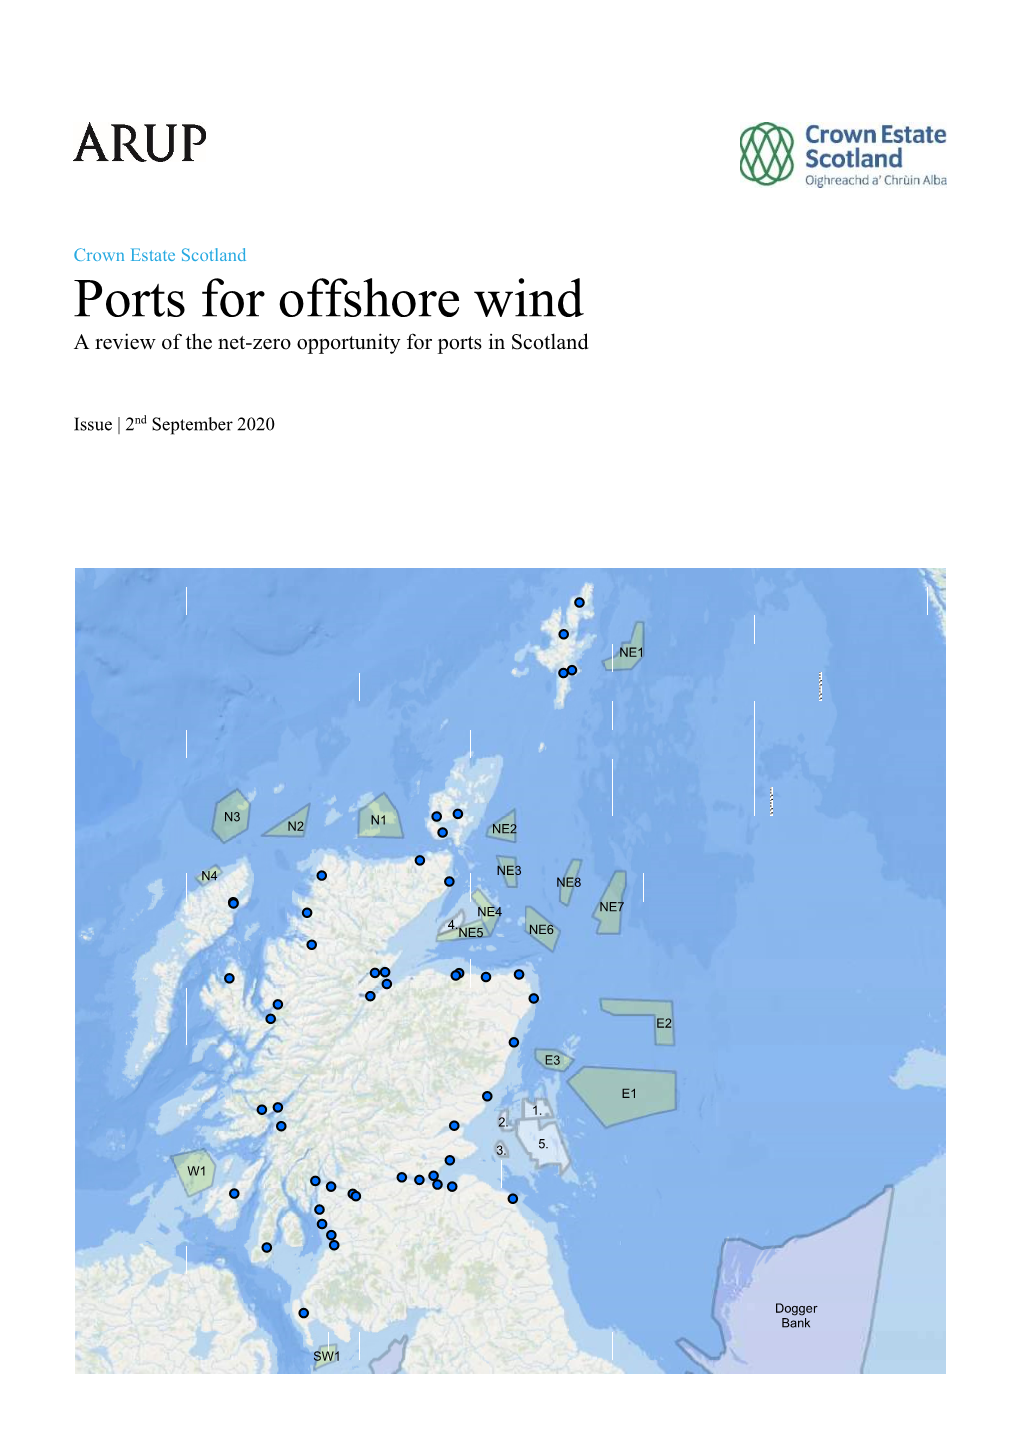 Ports for Offshore Wind a Review of the Net-Zero Opportunity for Ports in Scotland